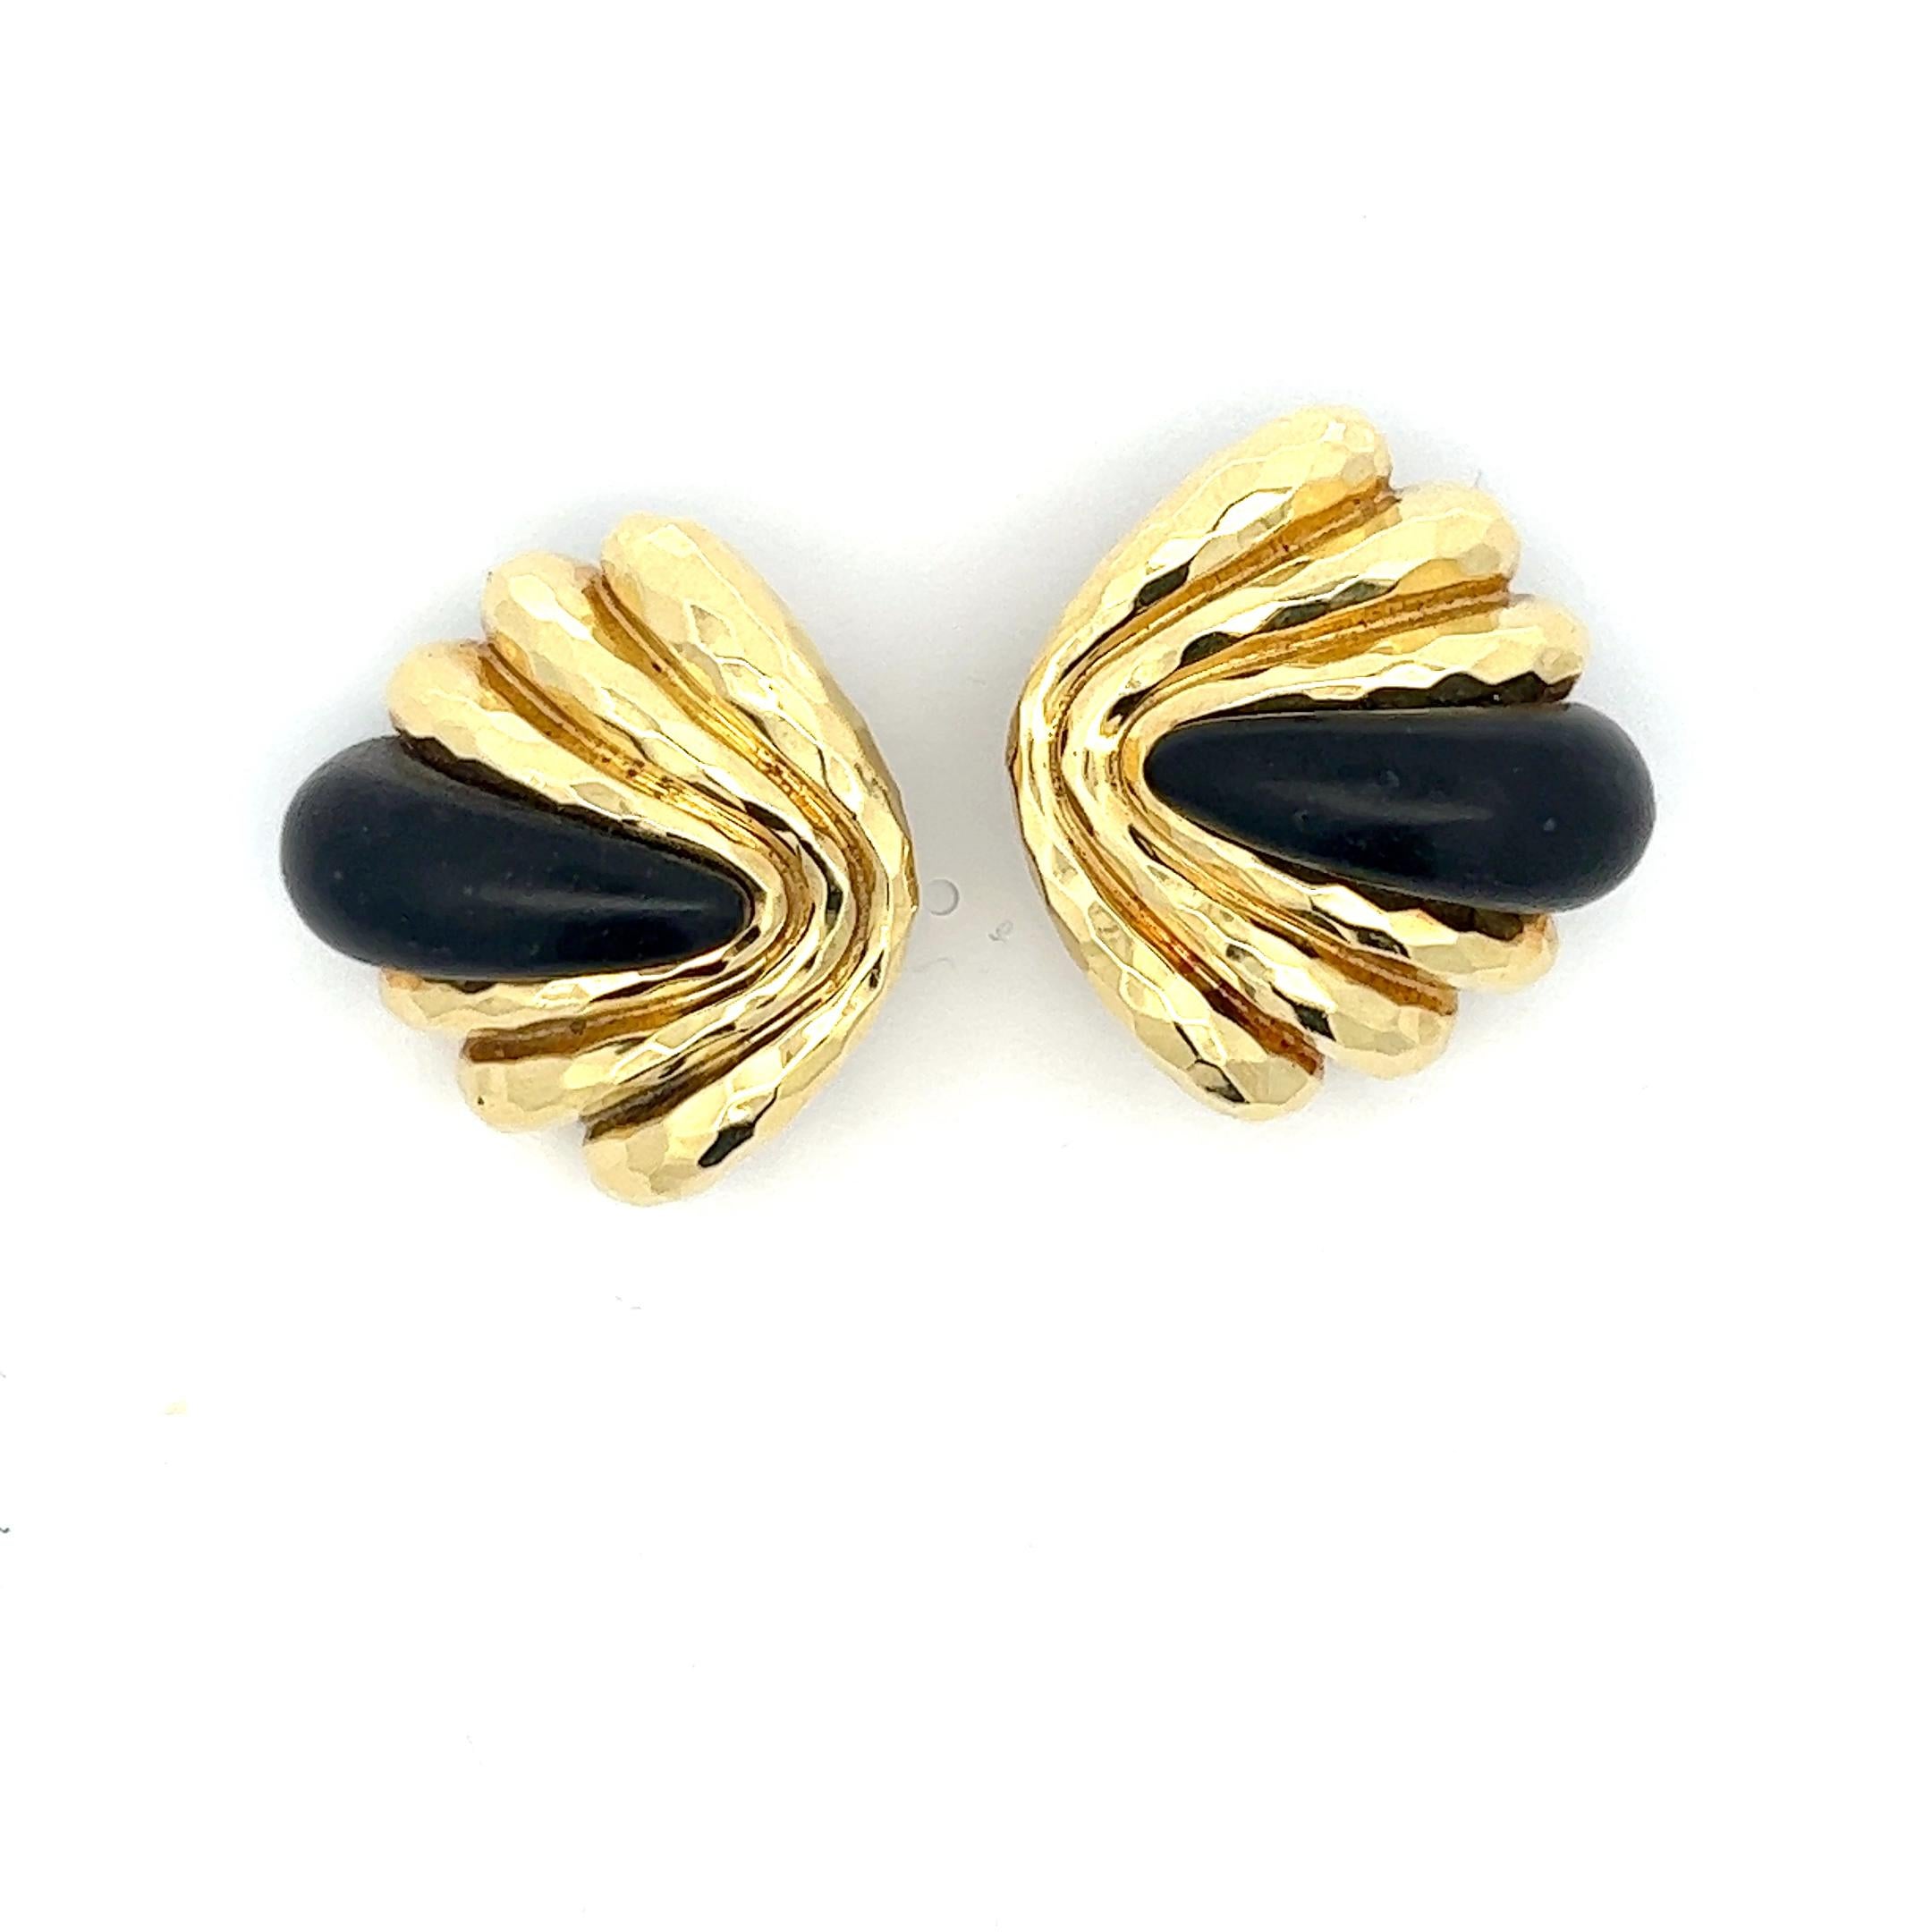 A pair of 18k yellow gold ear clips by Henry Dunay.
The ear clips are decorated with Ebony.
The ear clips were made in USA, circa 1970.
The ear clips are circa 2.8 by 3.1 cm.
One clip is stamped with 750 for 18k gold, makers mark Din a shield for